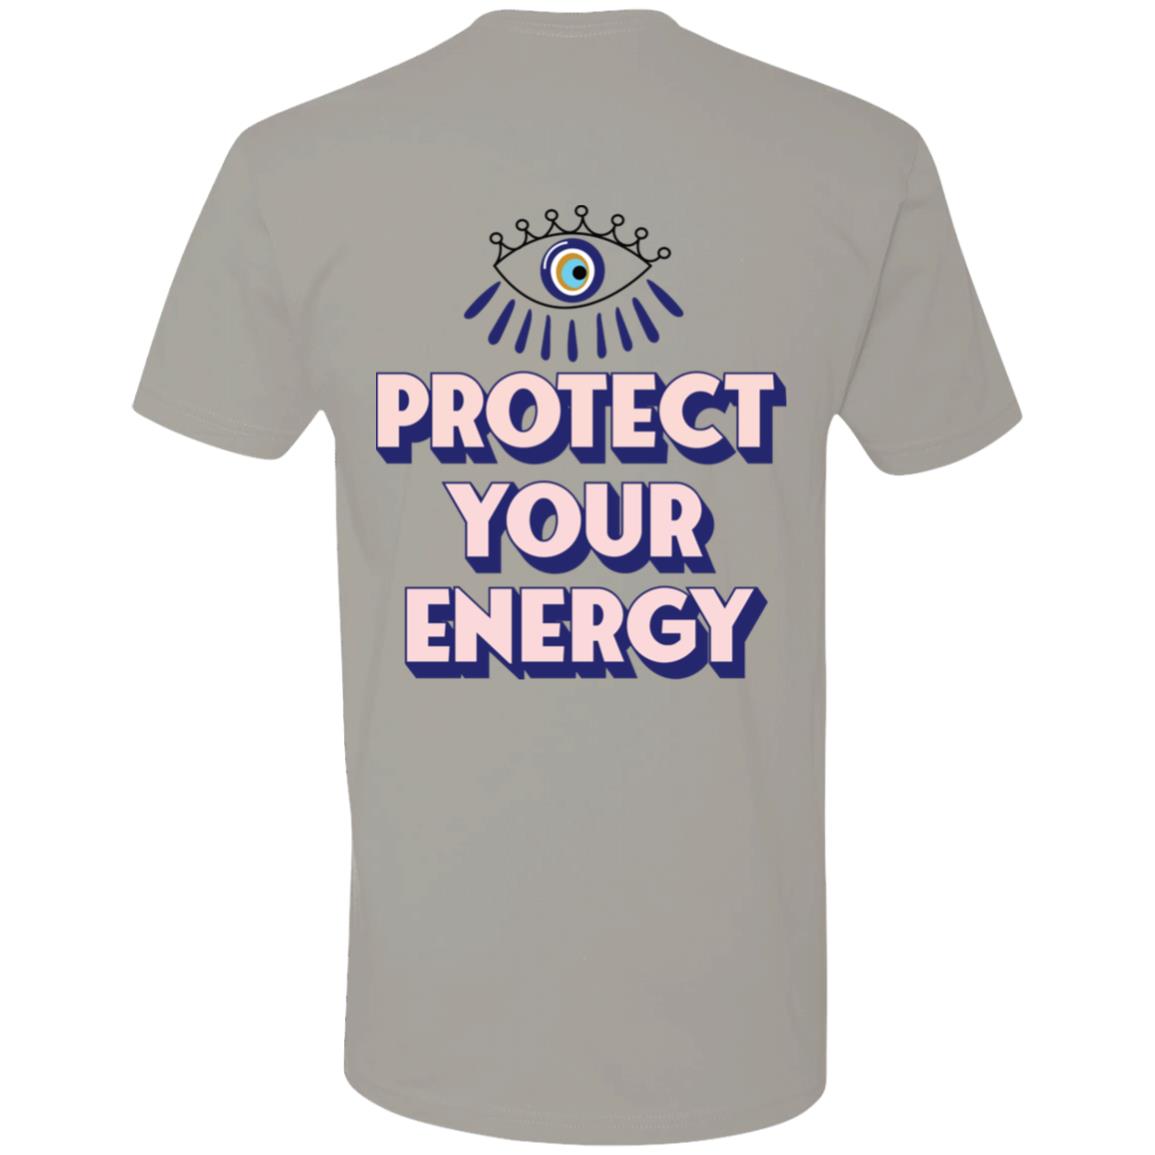 Protect Your Energy T-shirt